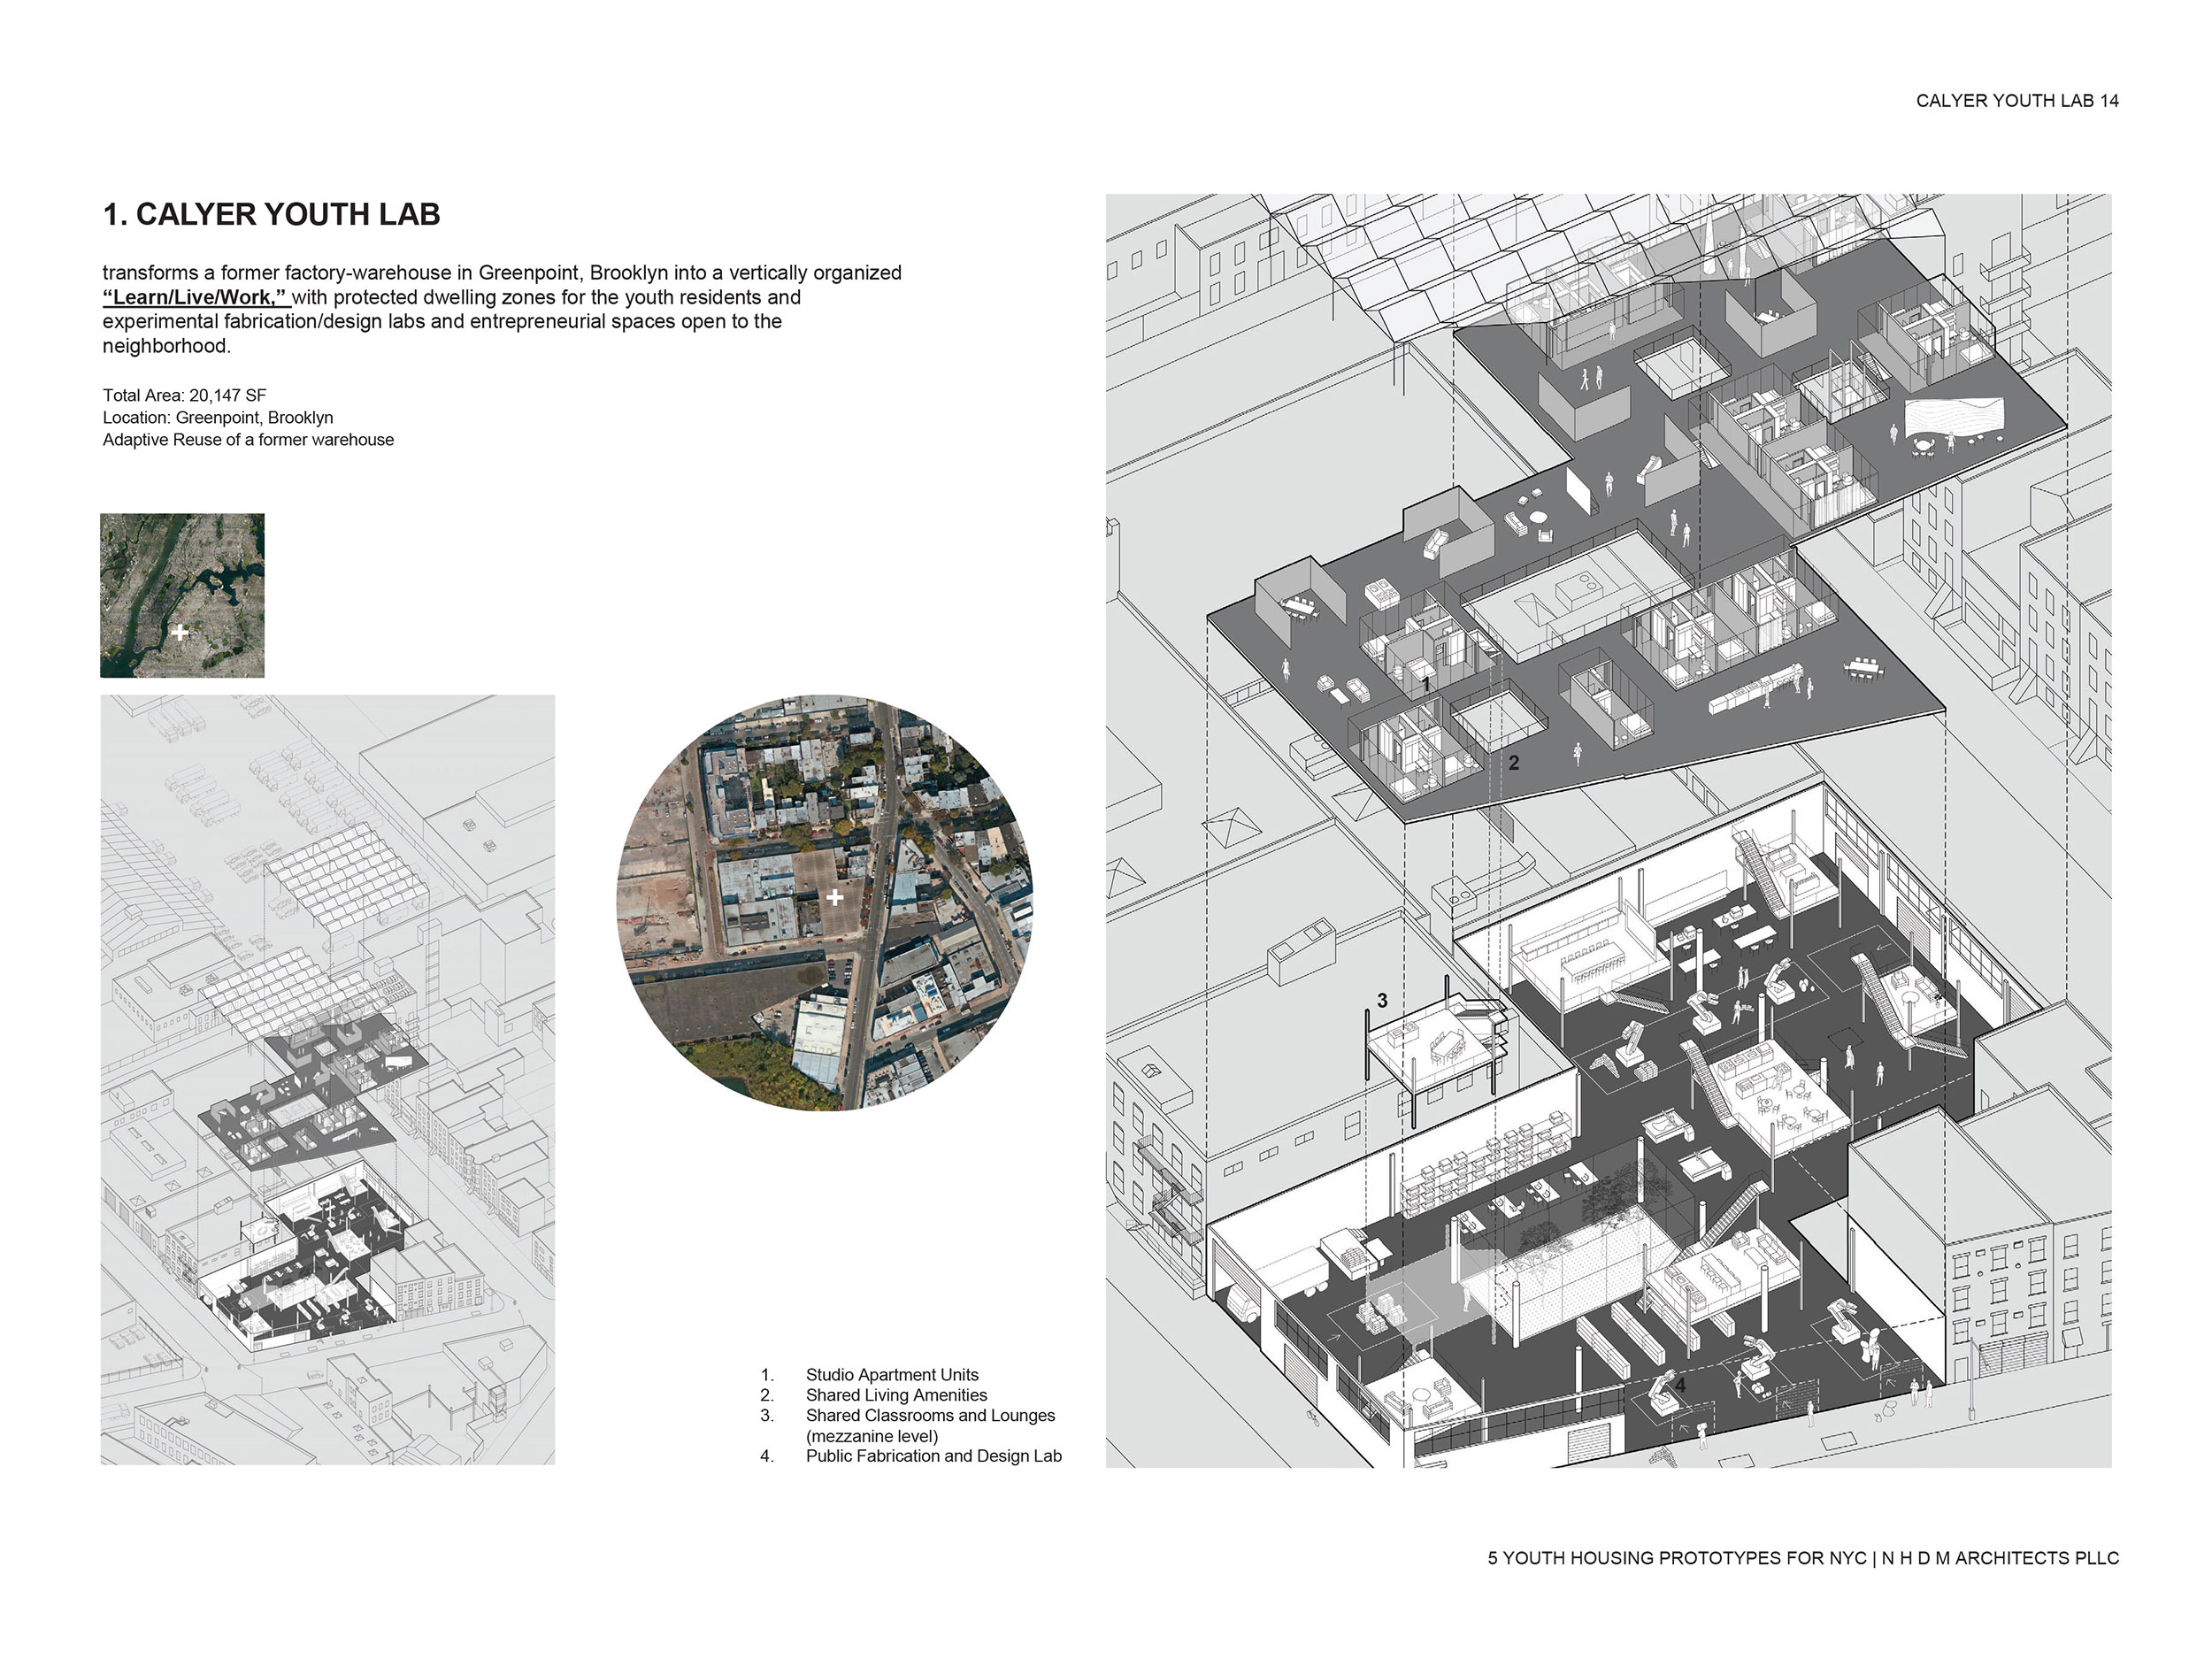 5 Youth Housing Prototypes for NYC illustration 2